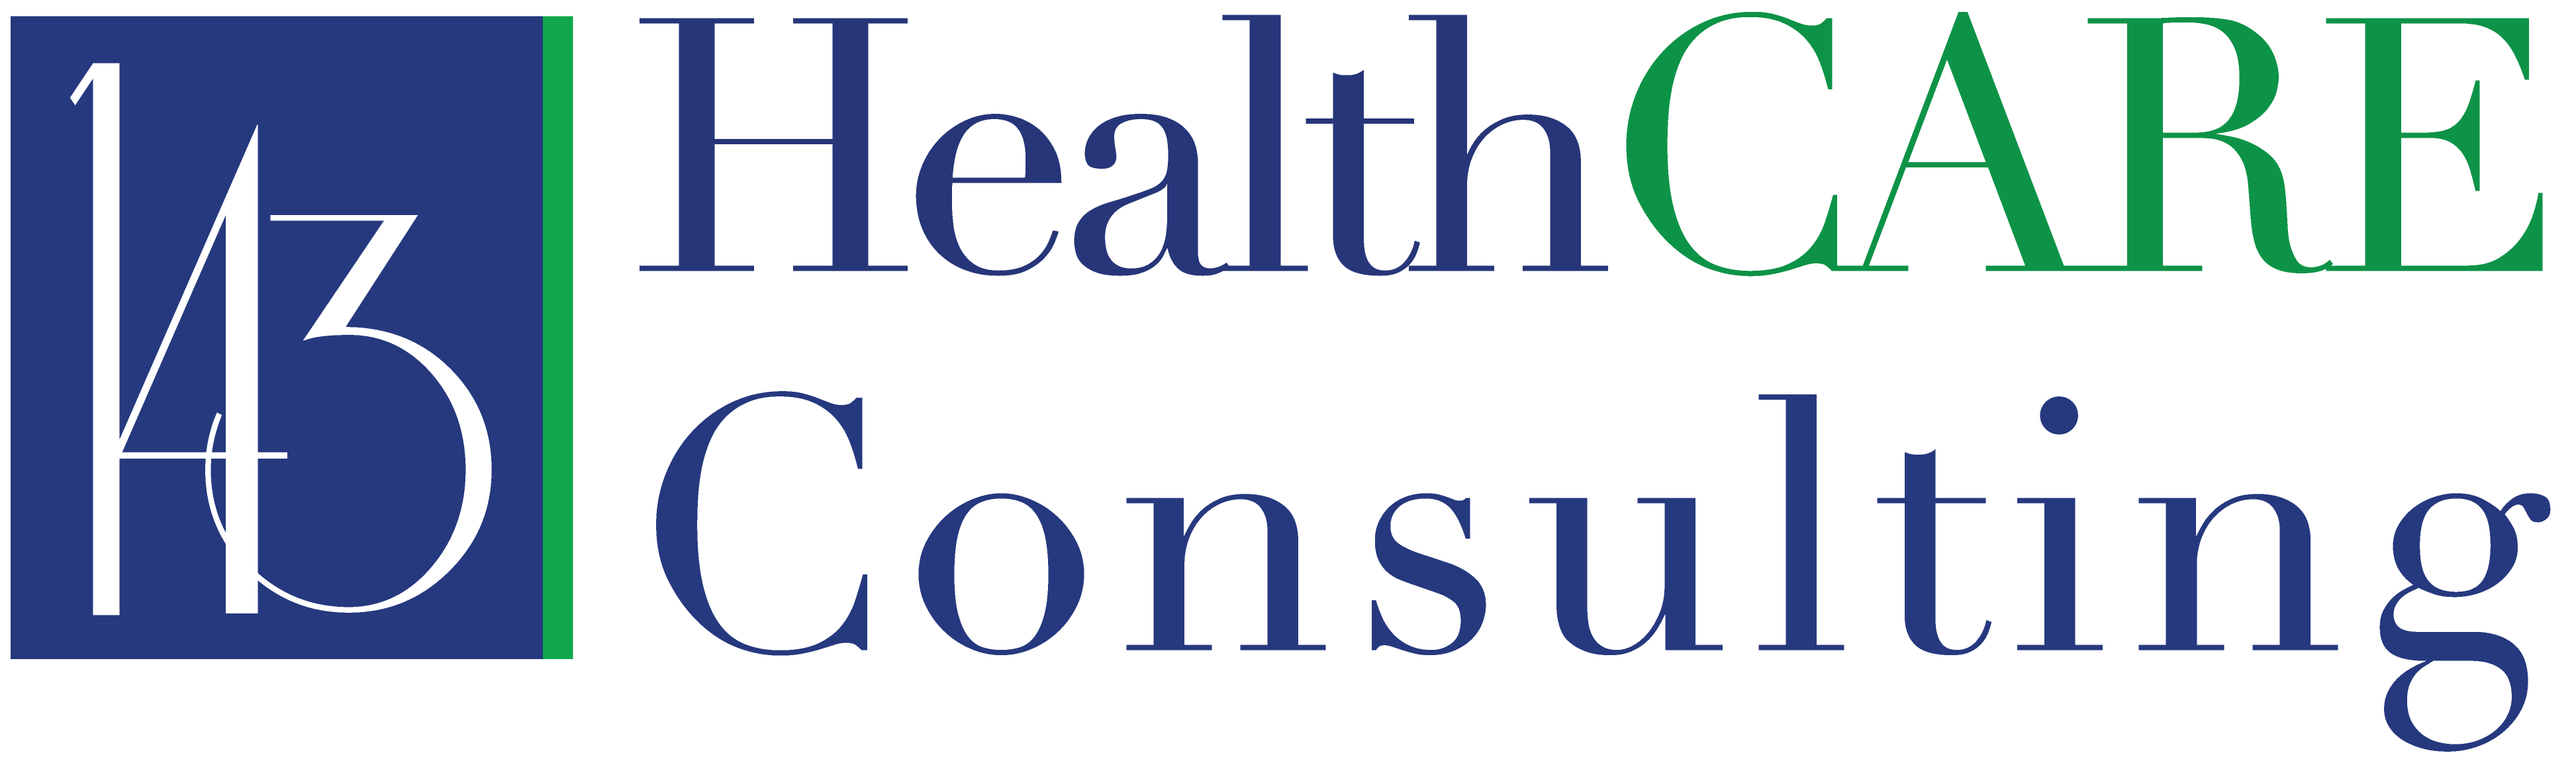 143 Healthcare Consulting Logo.png